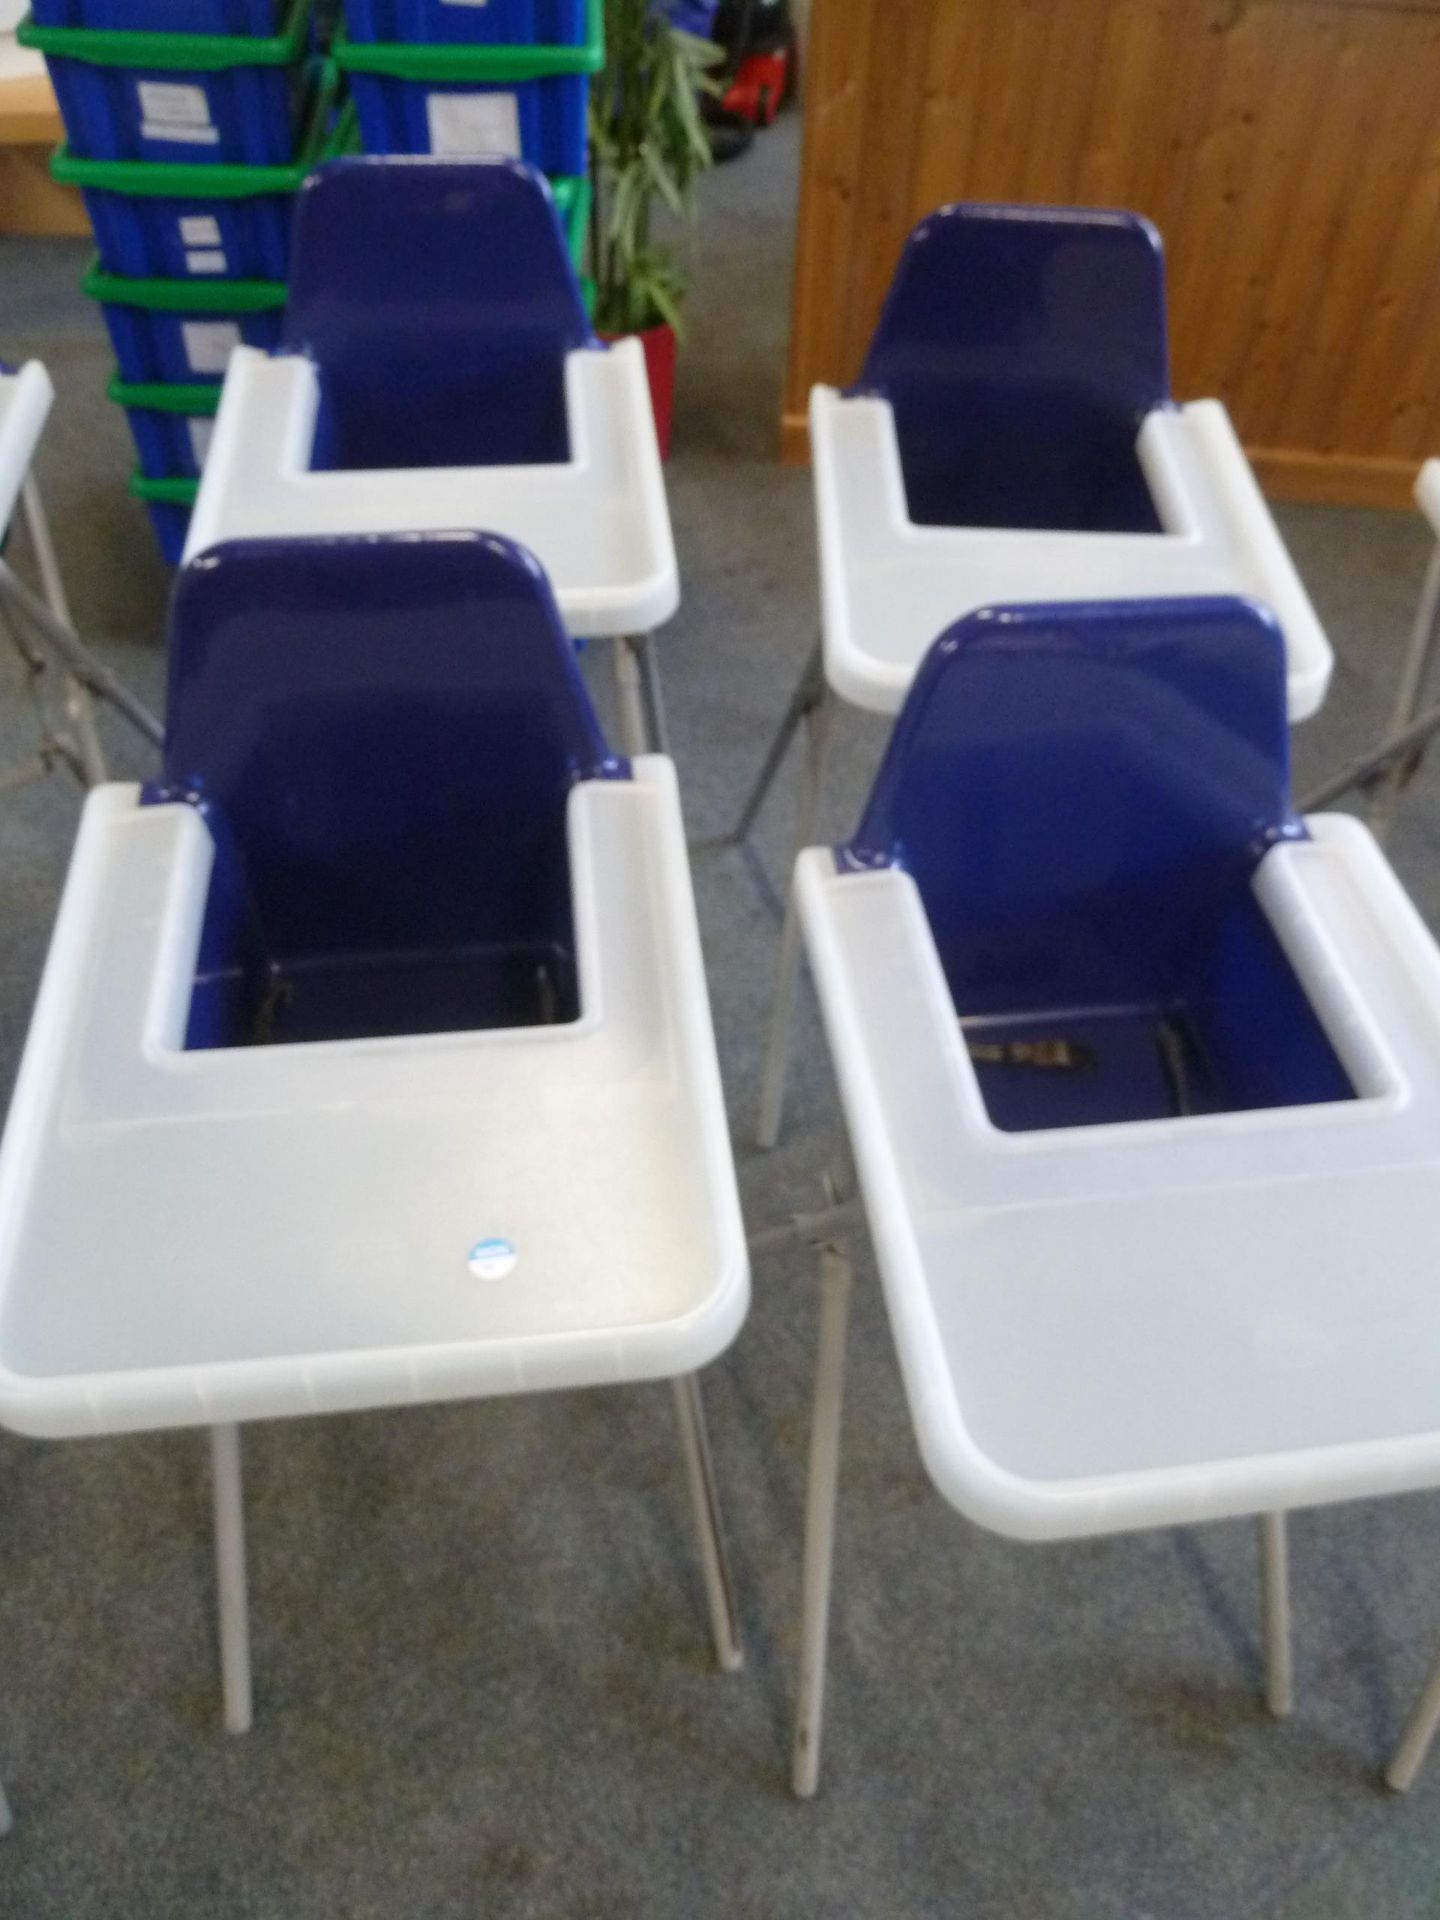 *4 x high chairs - plastic seat and tray with metal x-frame legs